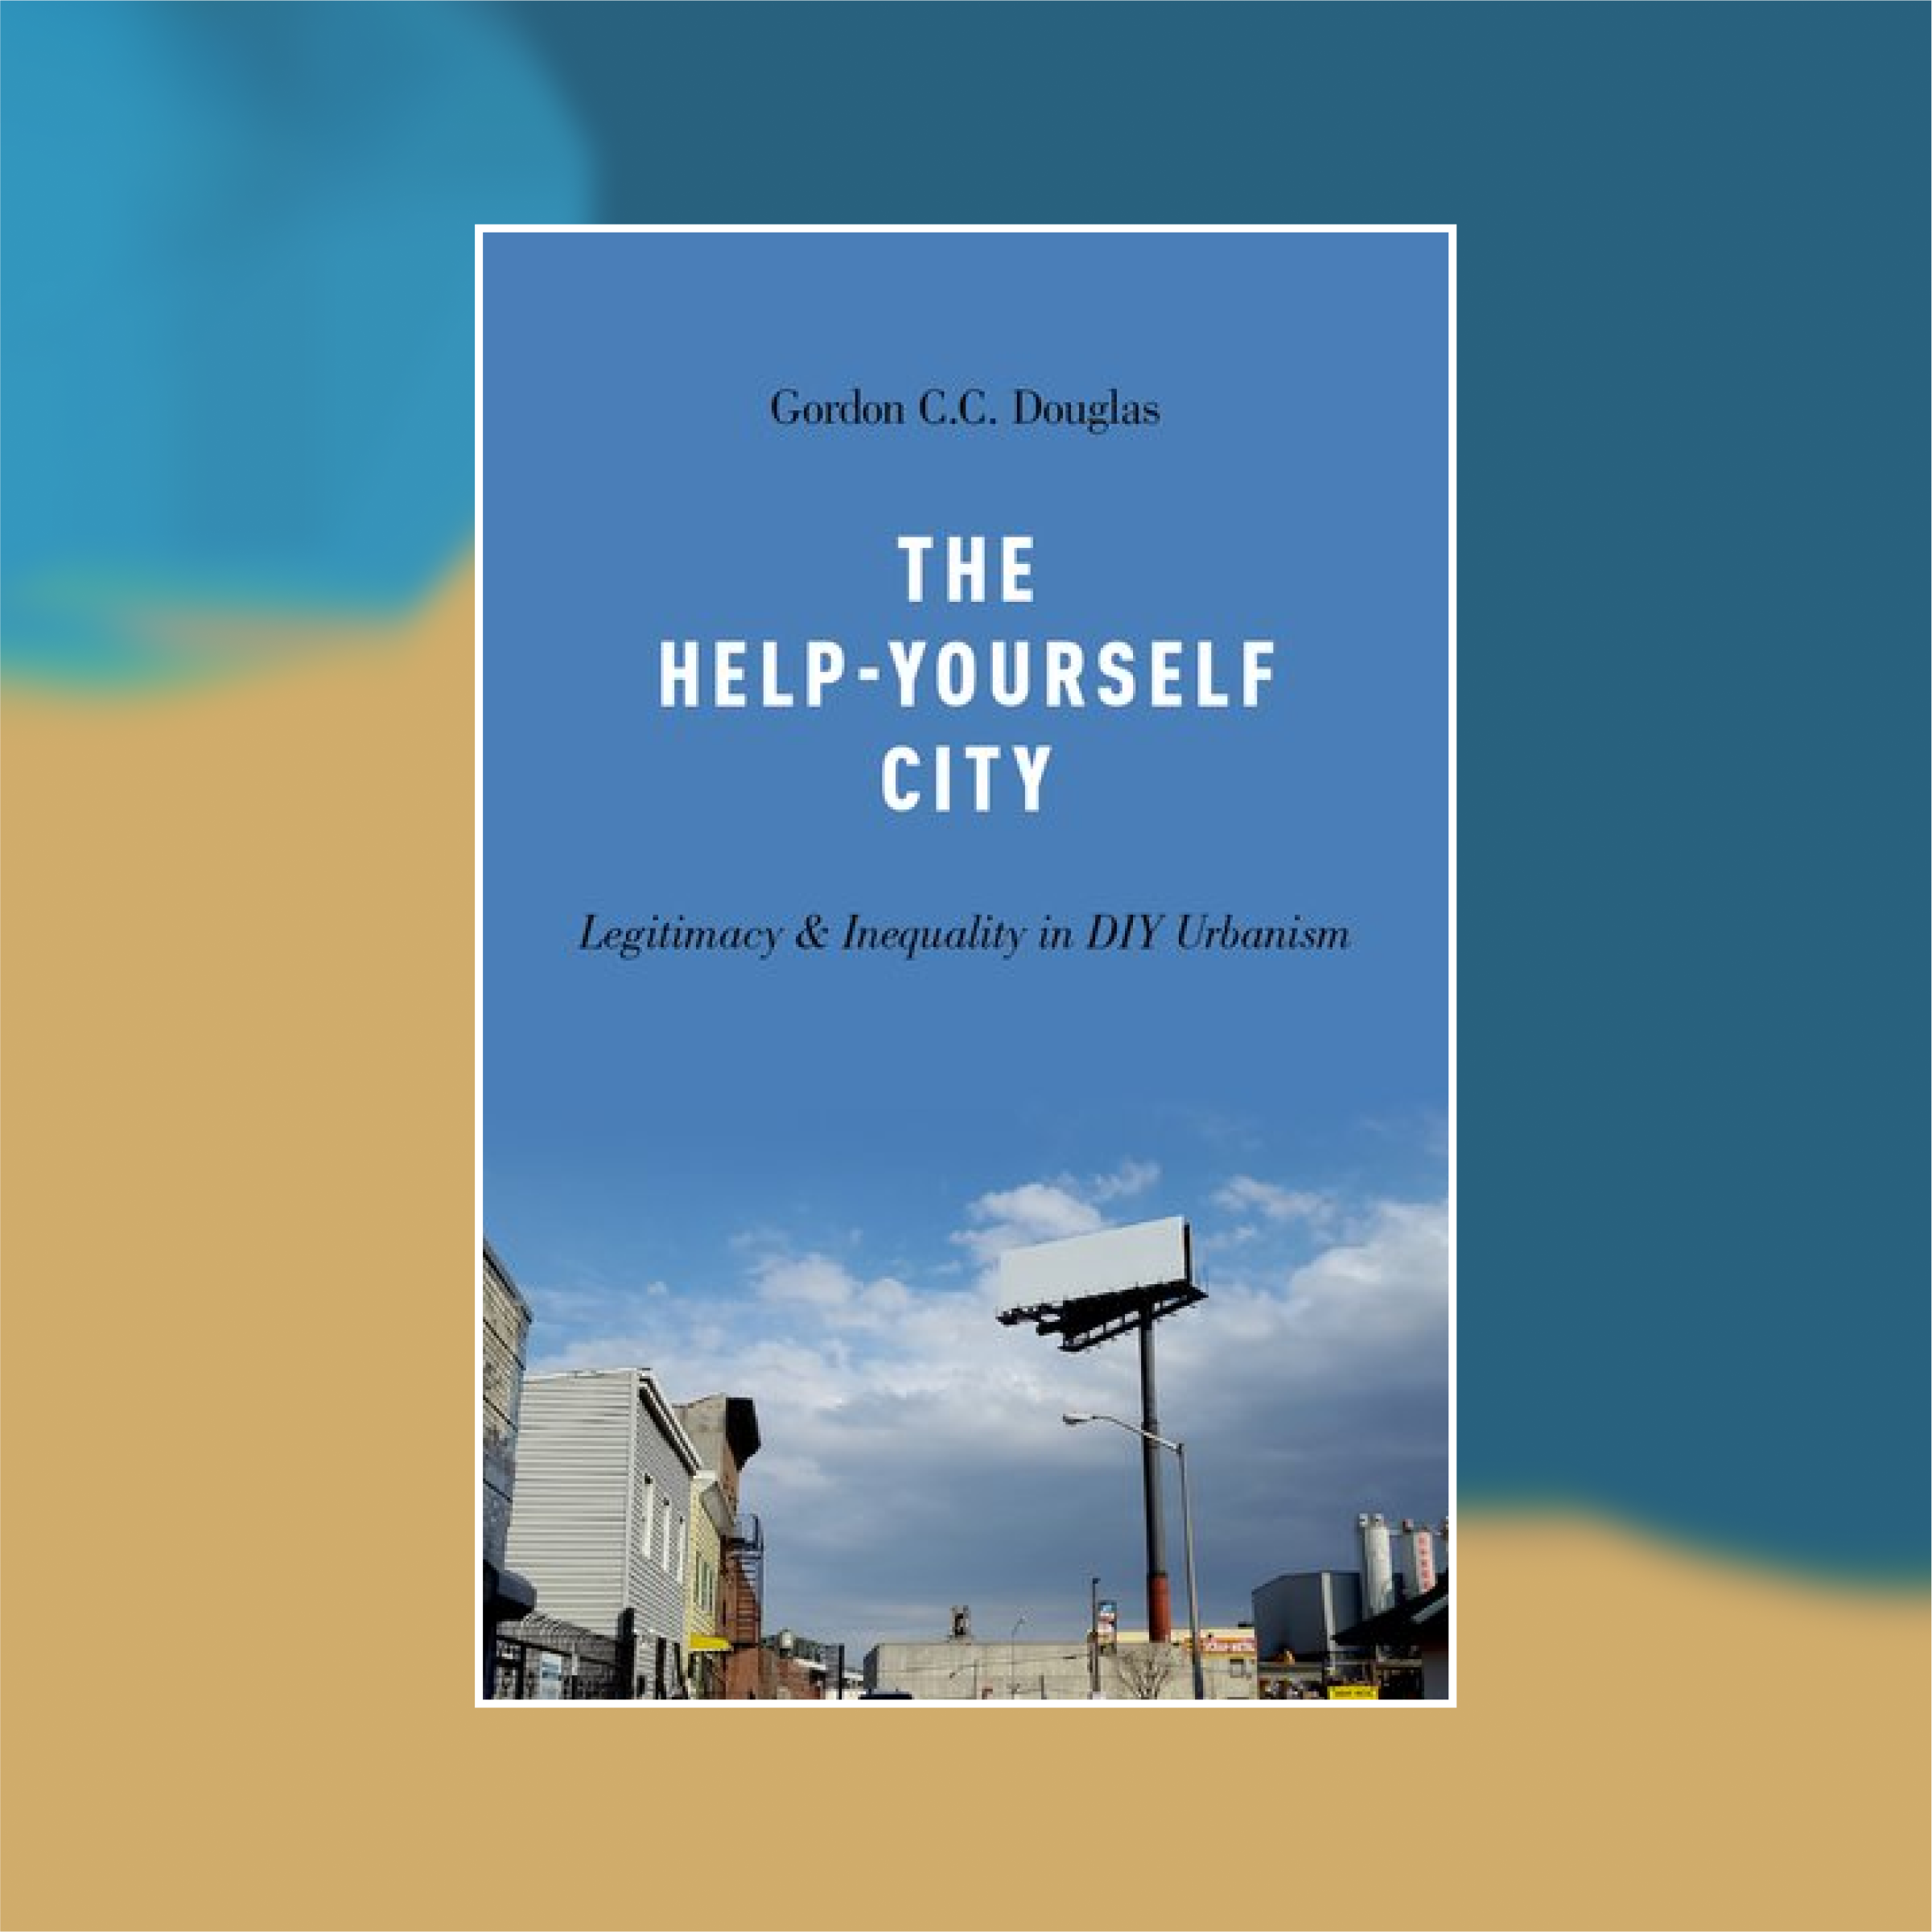 Book cover of The Help-Yourself City against a painted abstract background